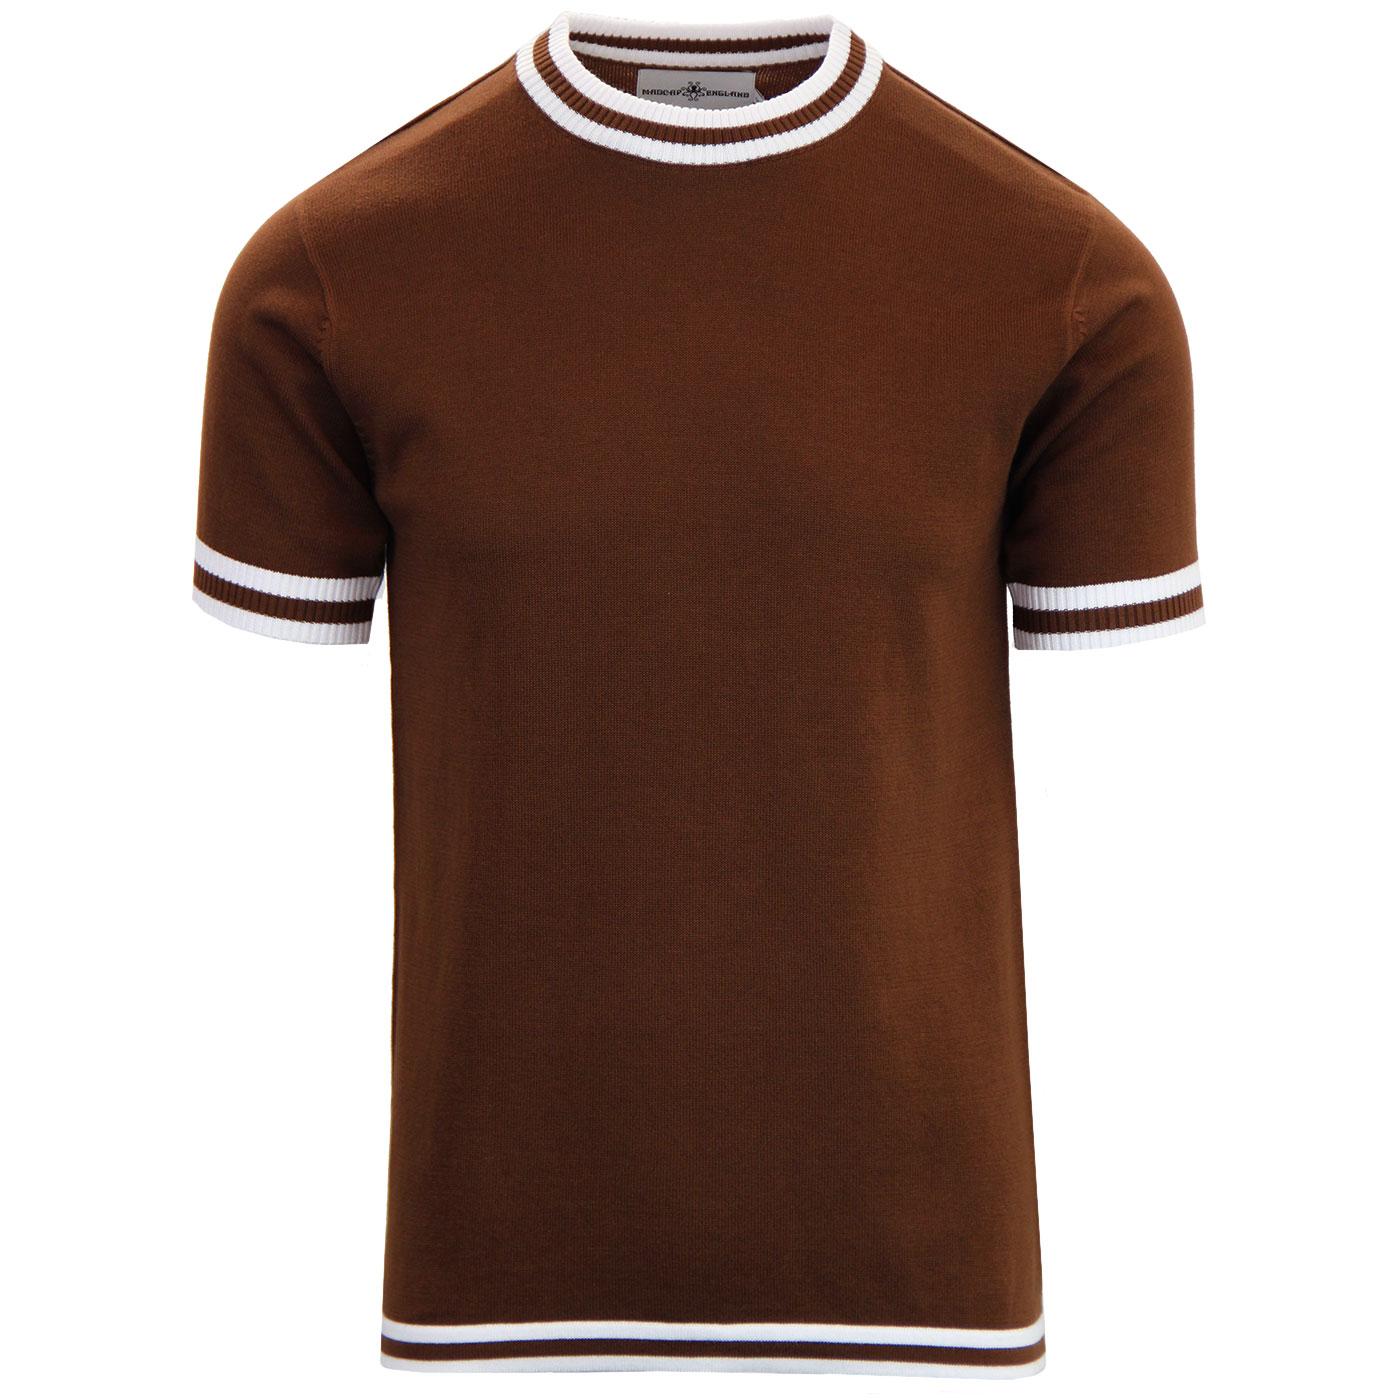 Madcap England Men's Retro 1960s Mod Tipped Knit T-shirt in Bison Brown